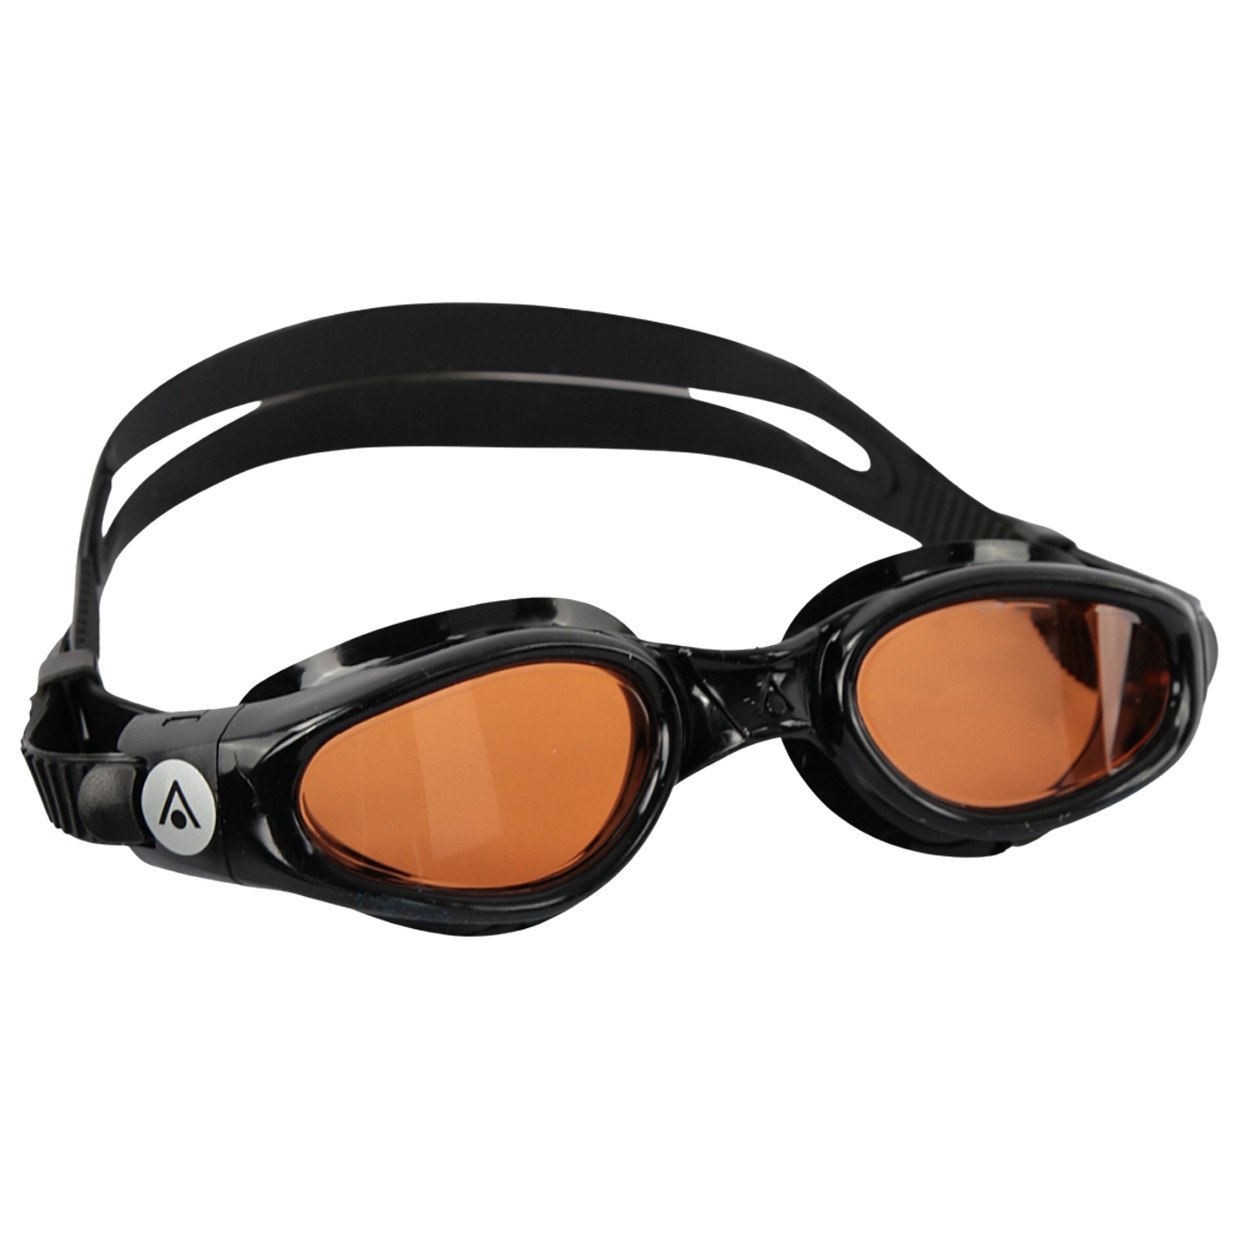 Schwimmbrille Kaiman Compact fit